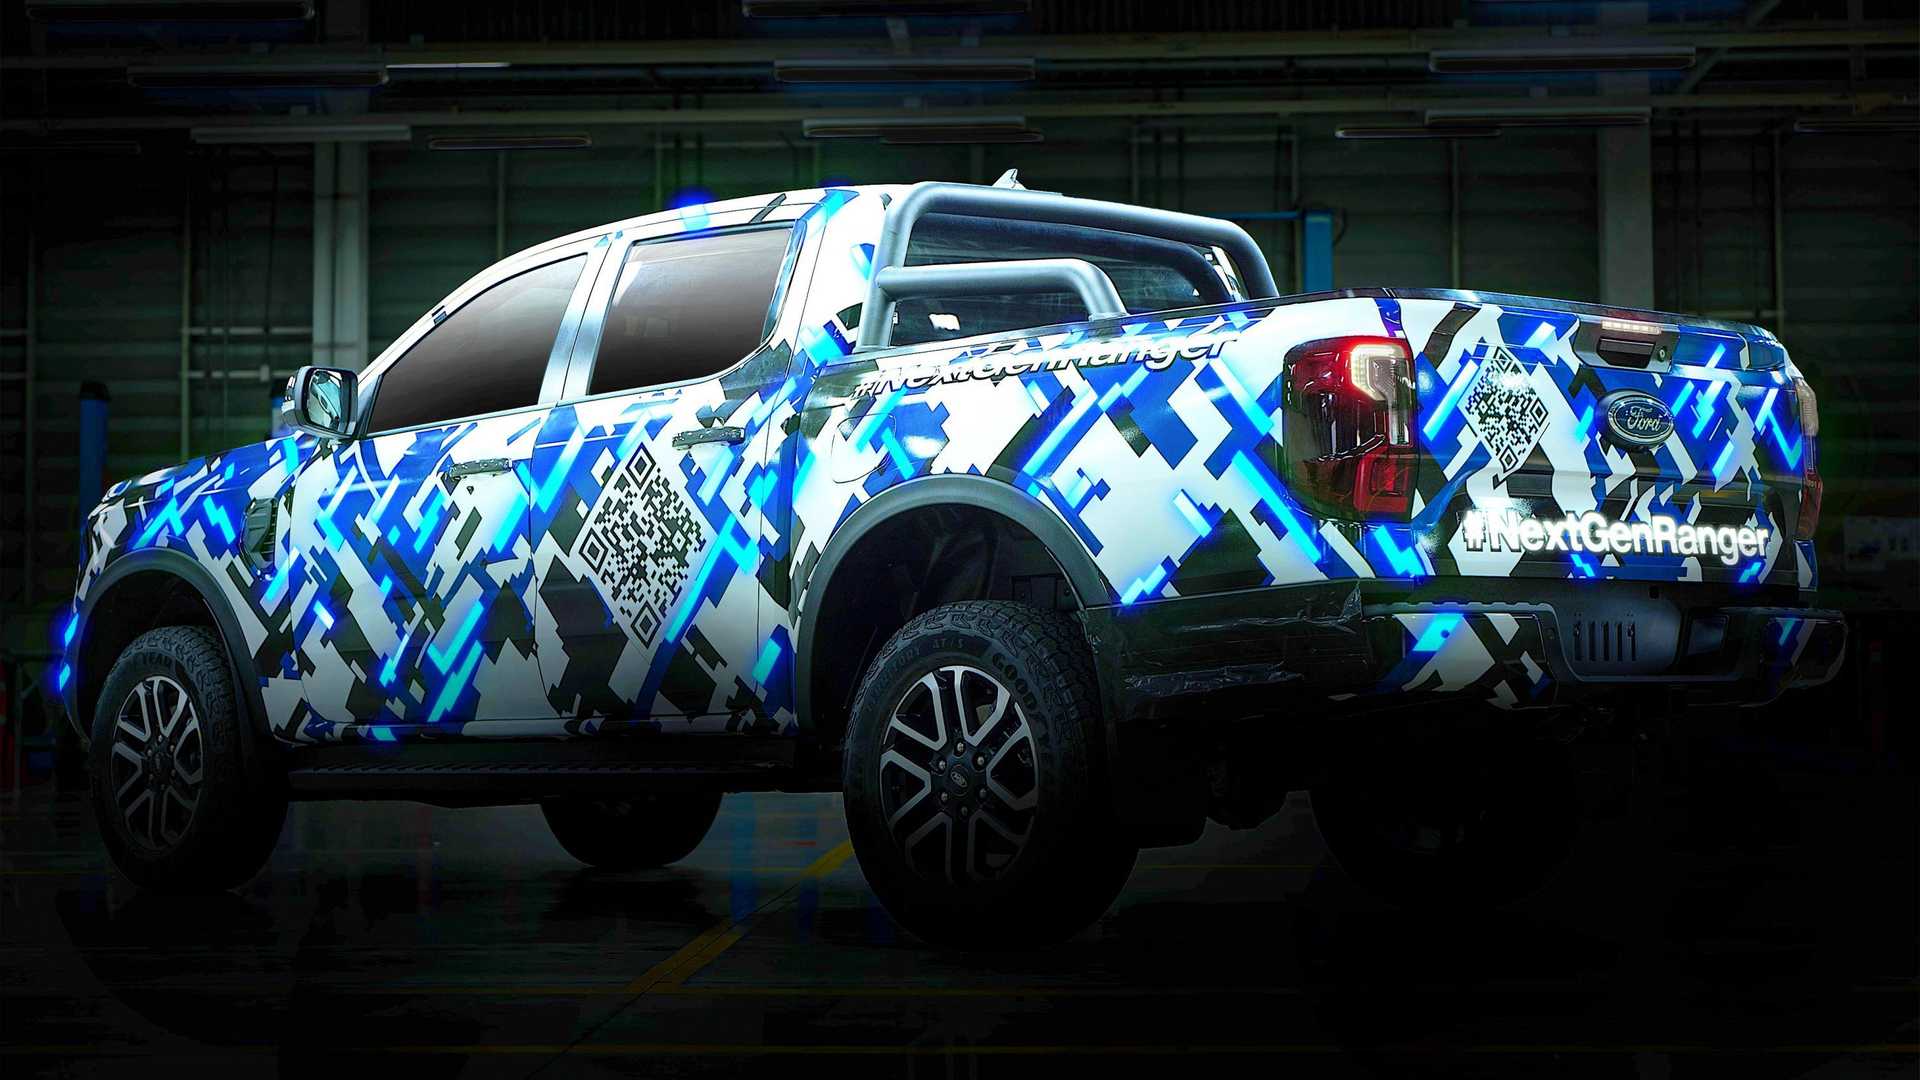 The new Ford Ranger will be presented on November 24